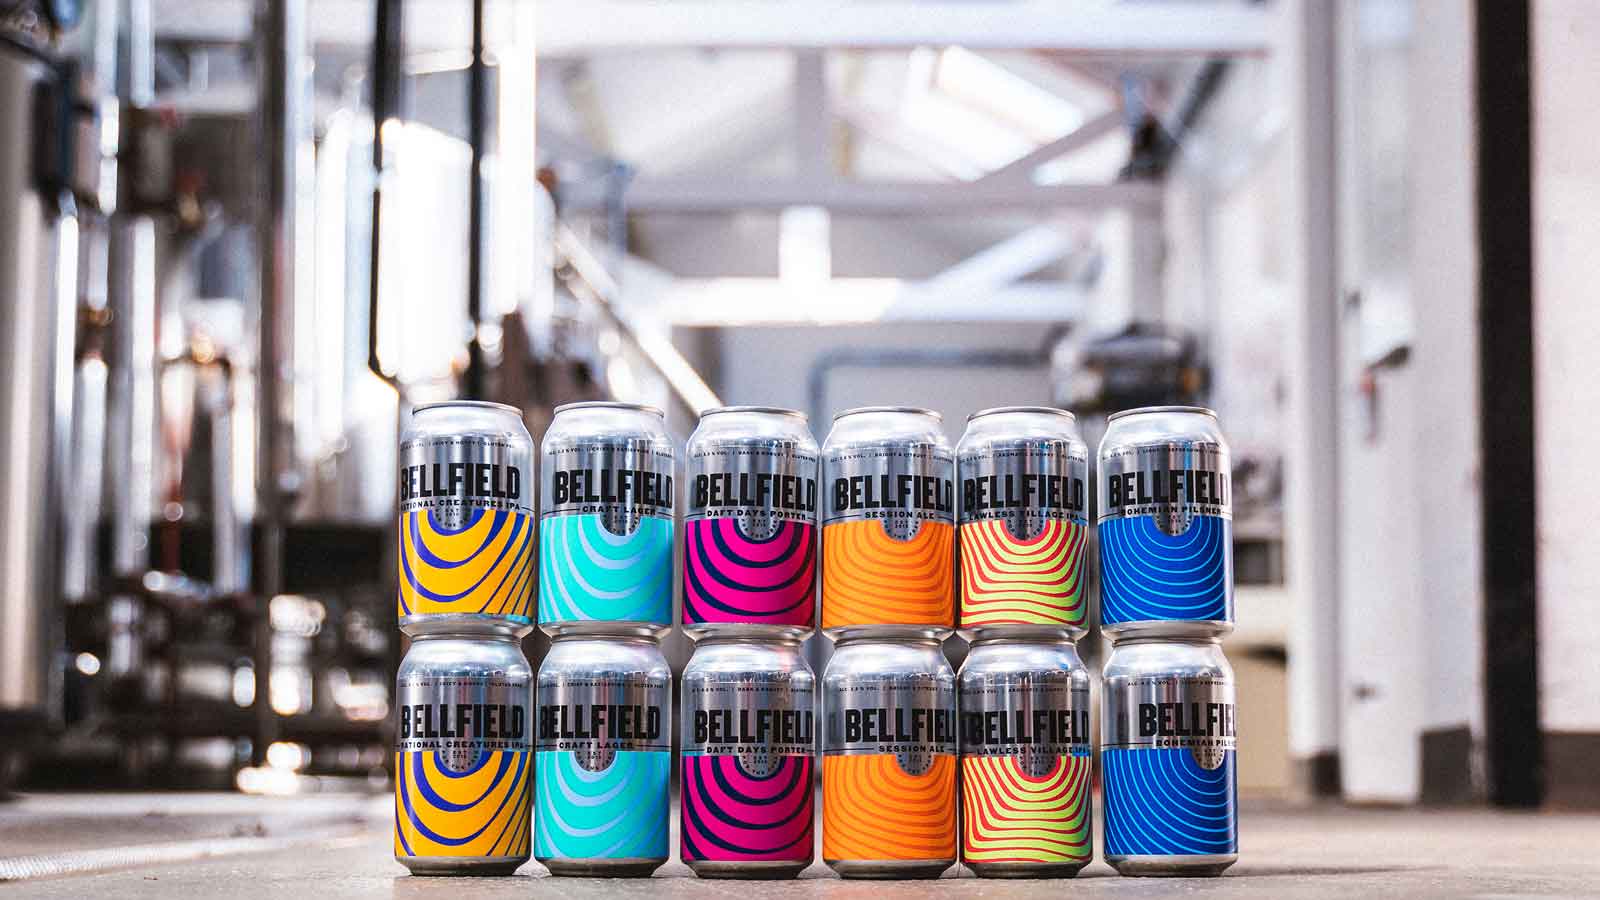 Bellfield wins Brewery of the Year at the Scottish Beer Awards 2023 